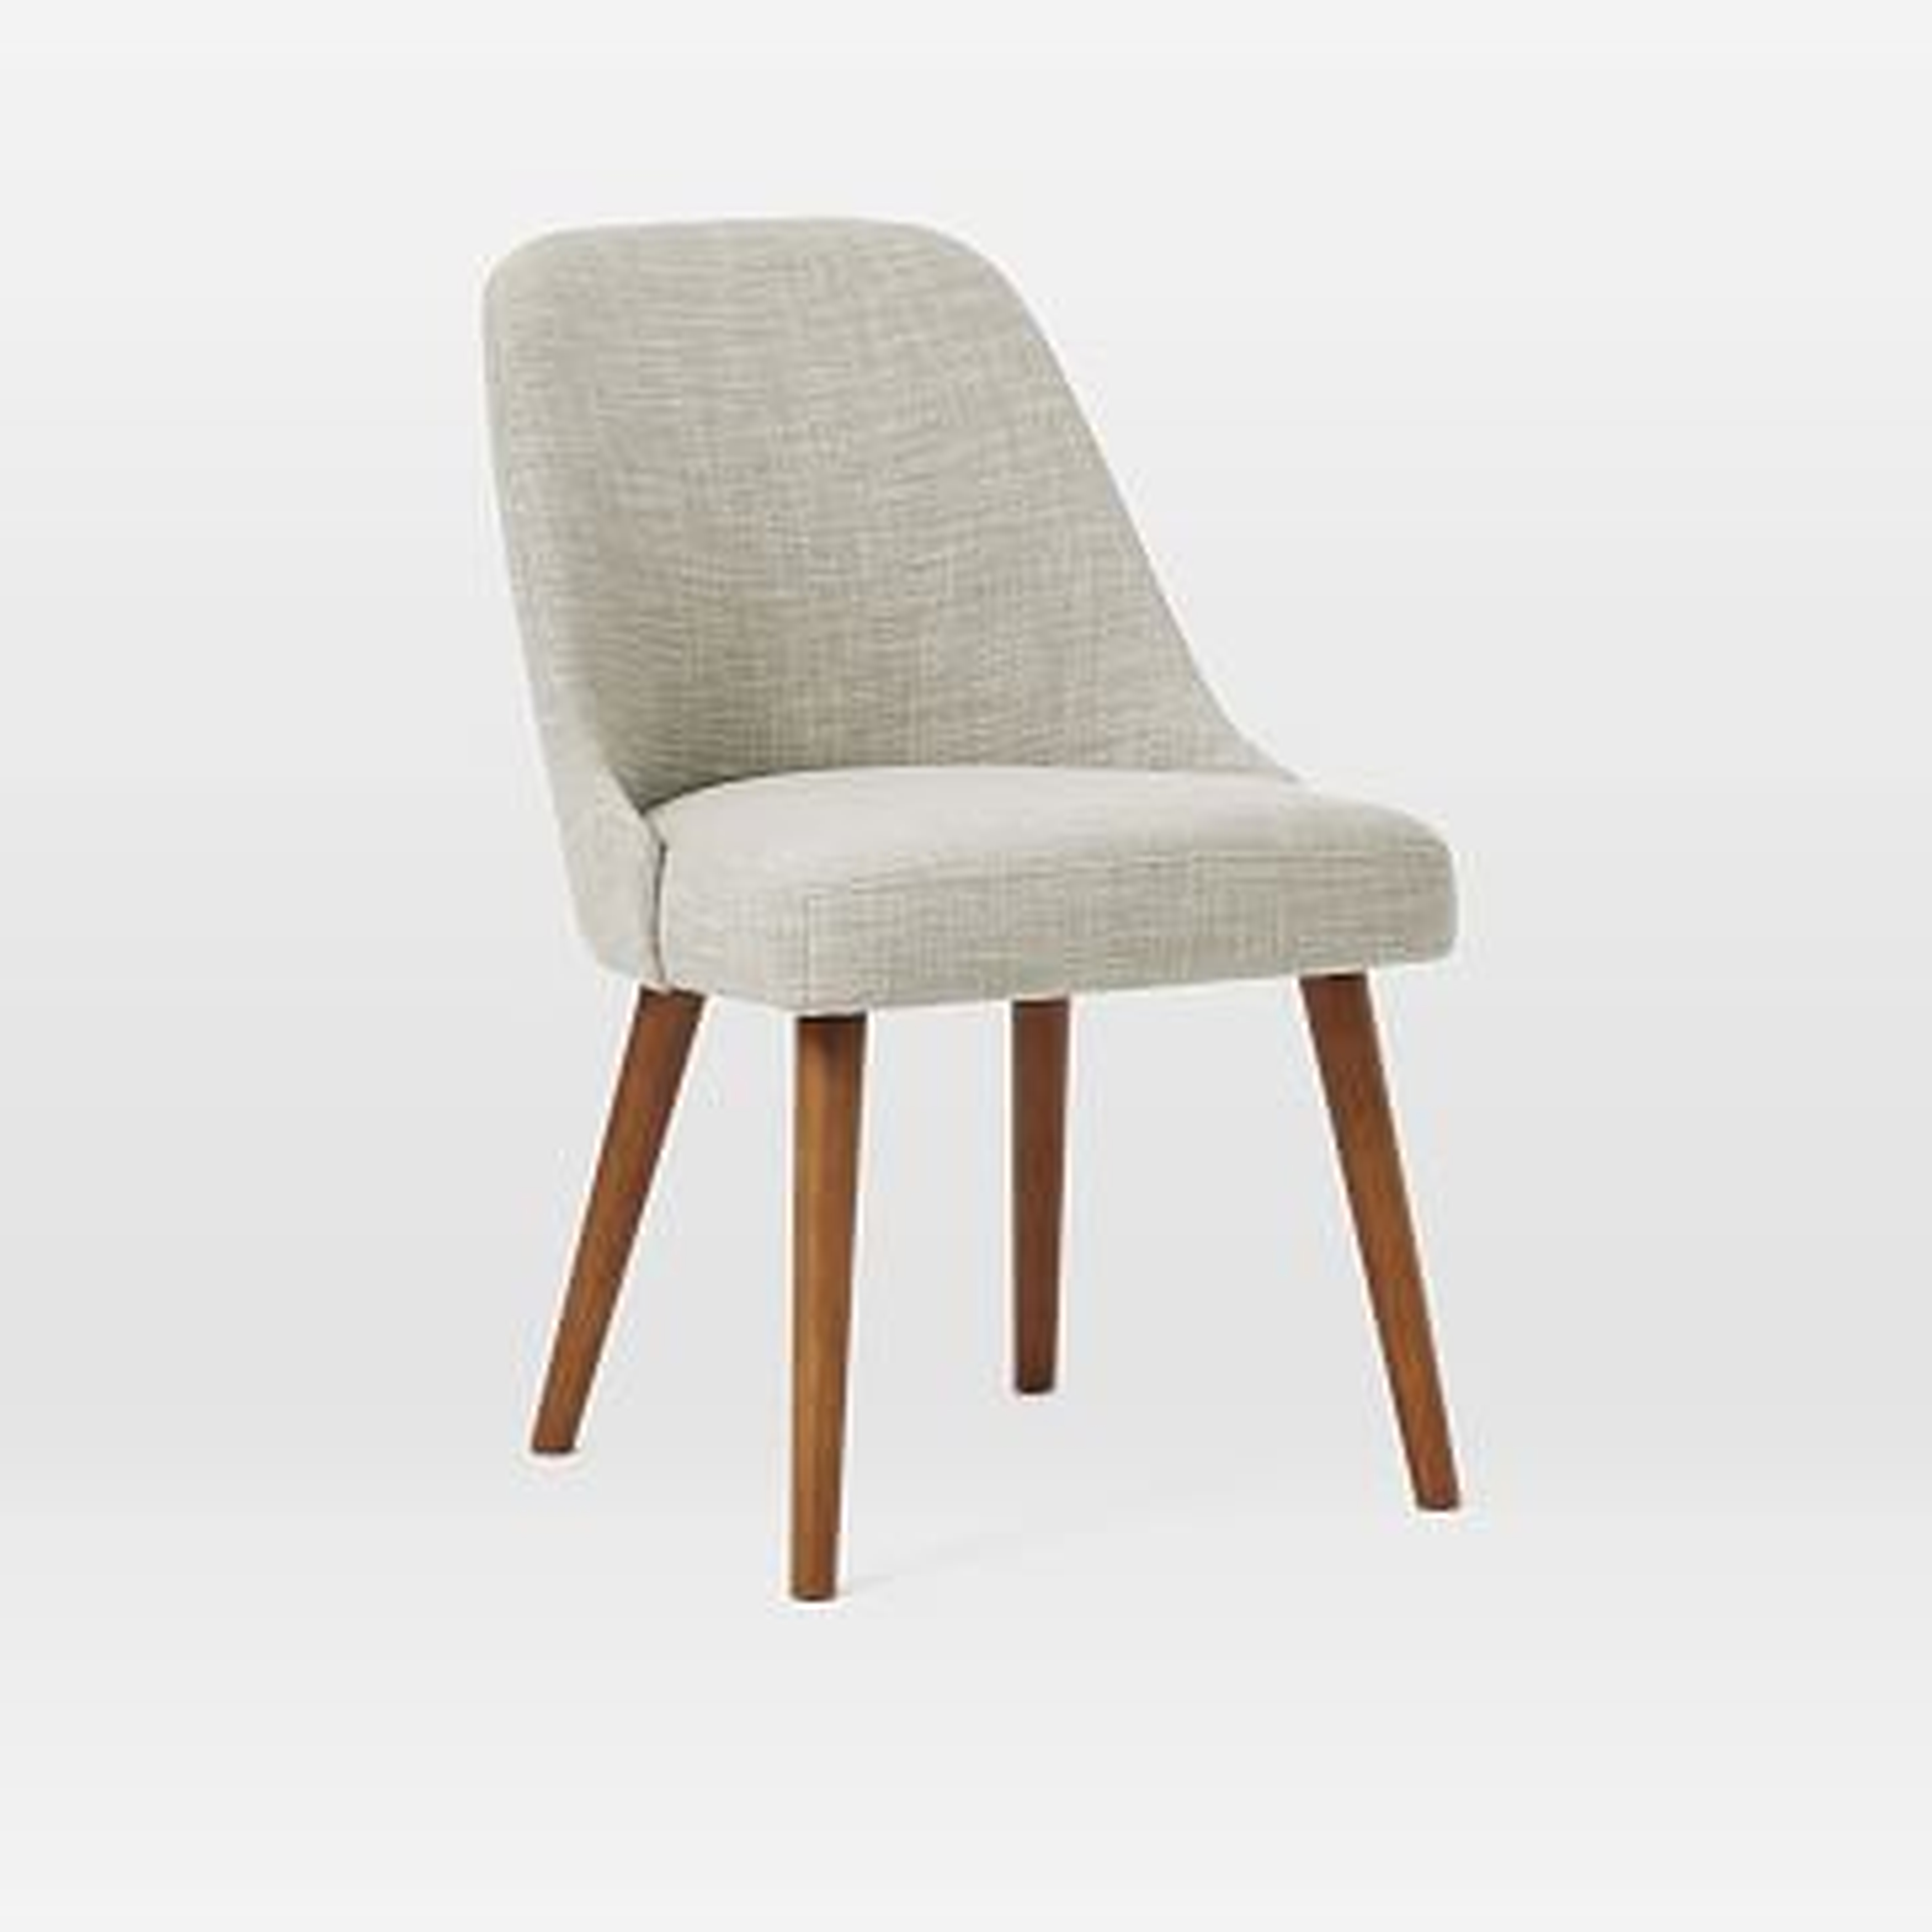 Mid-Century Upholstered Dining Chair, Yarn Dyed Linen Weave, Pearl Gray, Set of 2 - West Elm